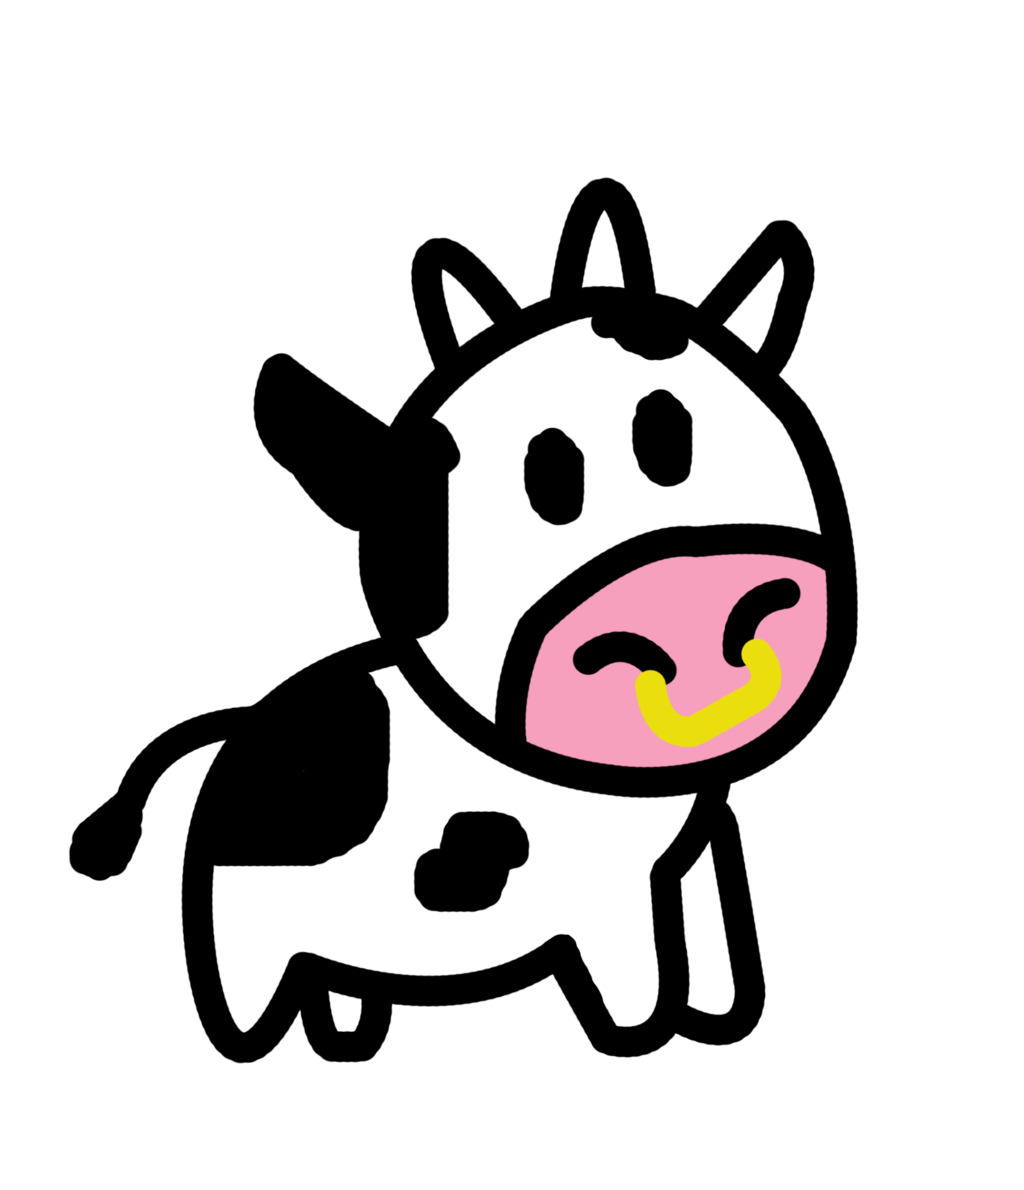 Clipart library: More Like Cartoon Cow PNG + PSD by denai1